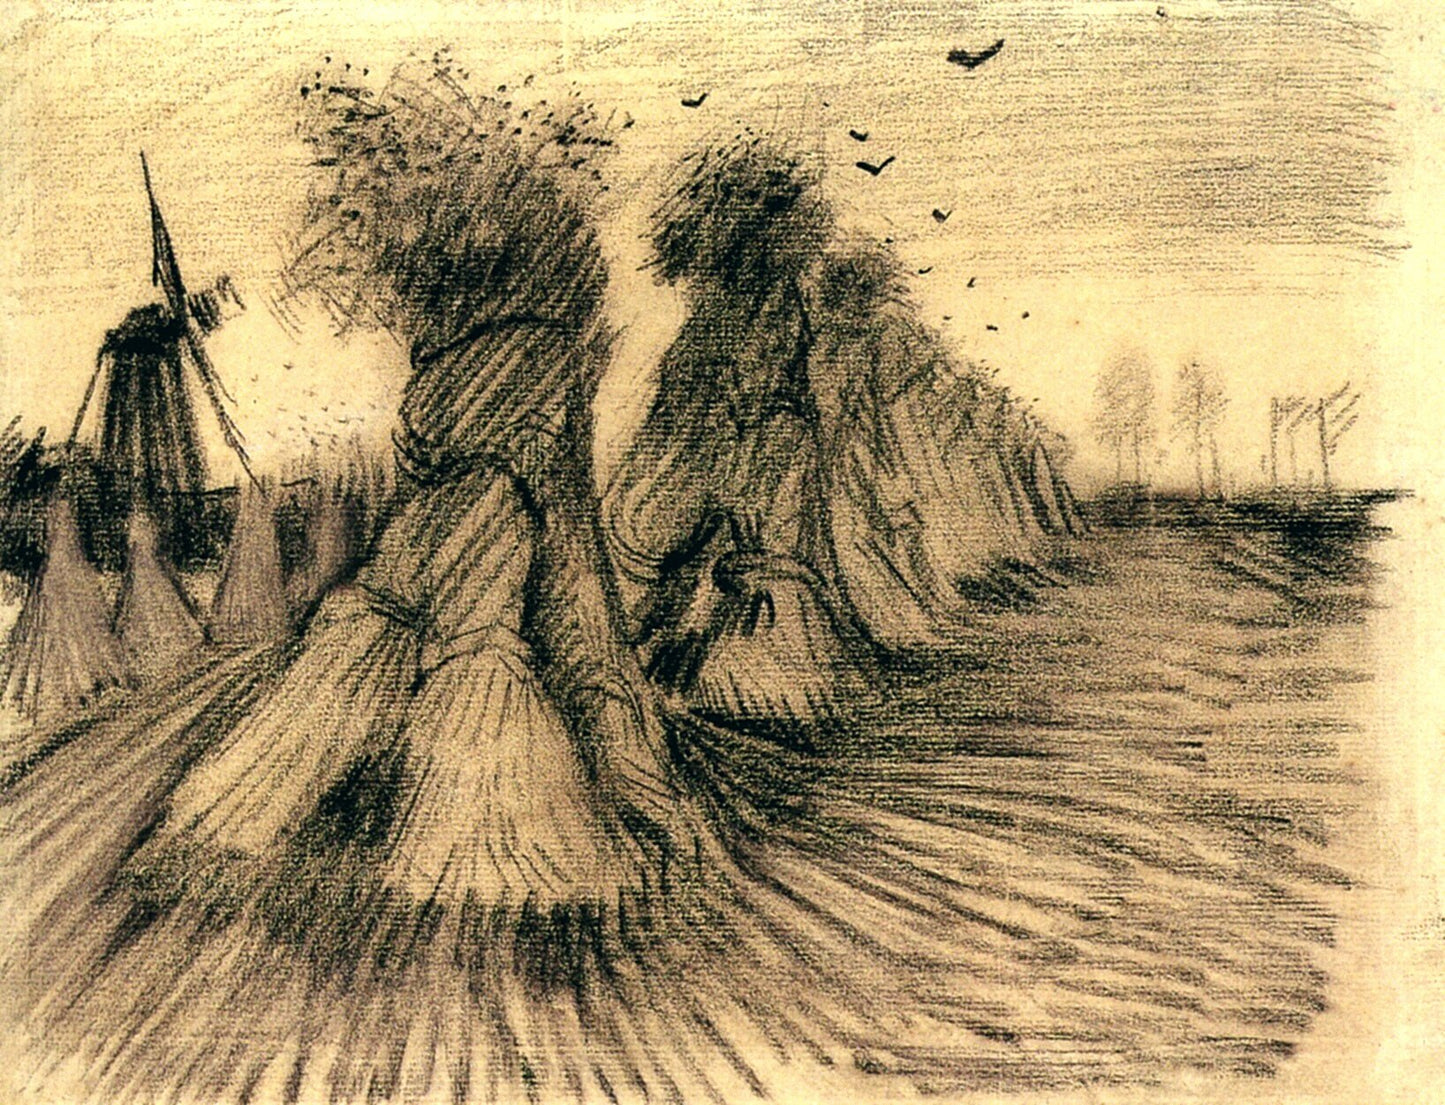 Stooks and a Mill, 1885